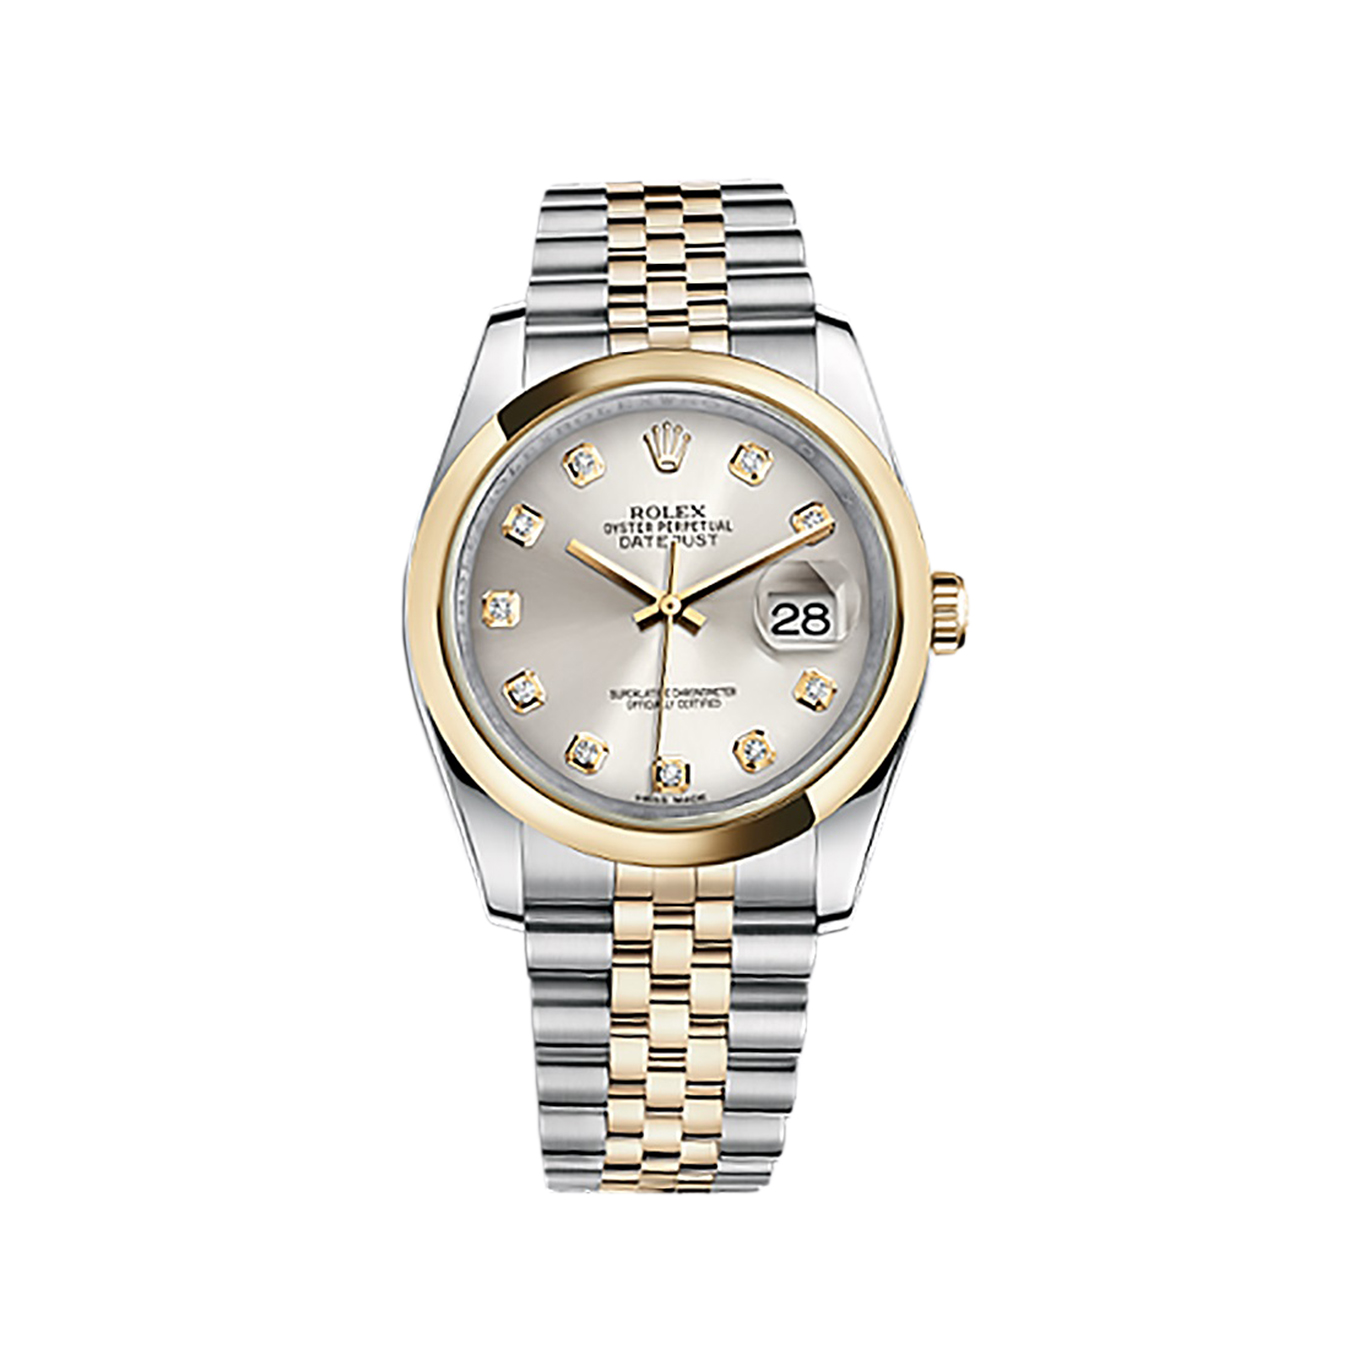 Datejust 36 116203 Gold & Stainless Steel Watch (Silver Set with Diamonds)